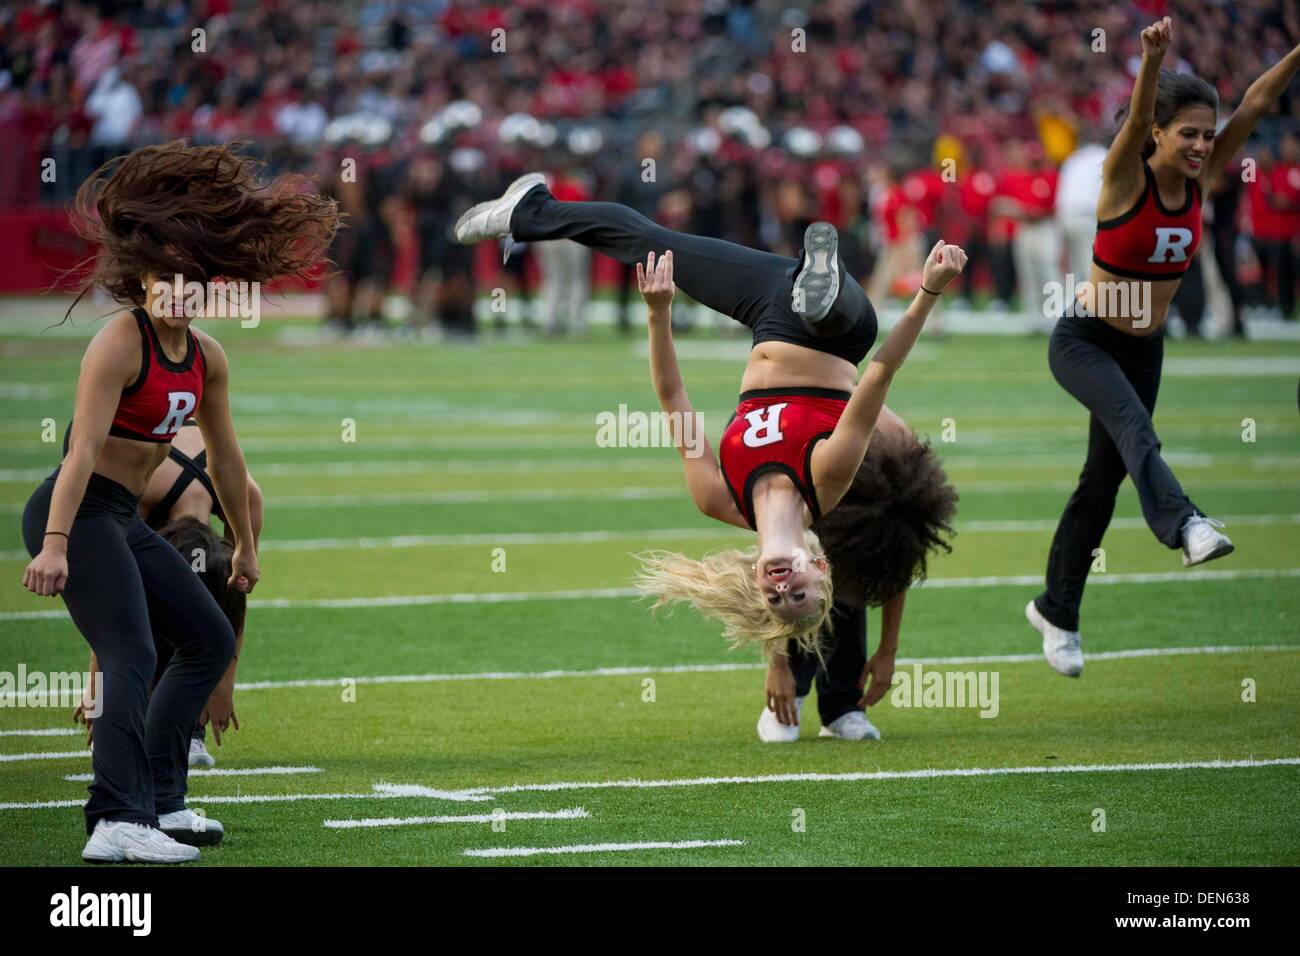 Piscataway, New Jersey, USA. 21st Sep, 2013. September 21, 2013: A Rutgers Scarlet Knights cheerleader is upside down as they perform during the game between Arkansas Razorbacks and Rutgers Scarlet Knights at Highpoint Solutions Stadium in Piscataway, NJ. Rutgers Scarlet Knights defeated The Arkansas Razorbacks 28-24. Credit:  csm/Alamy Live News Stock Photo